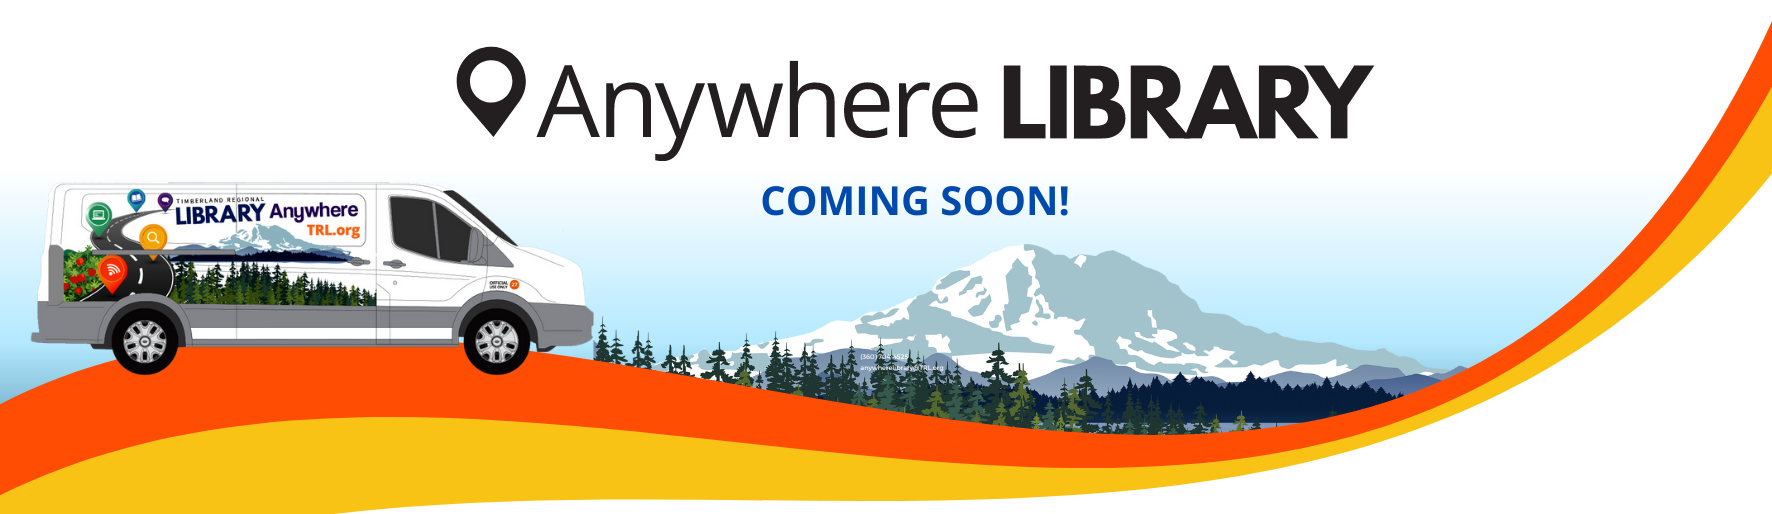 Anywhere Library brings the library directly to our communities 